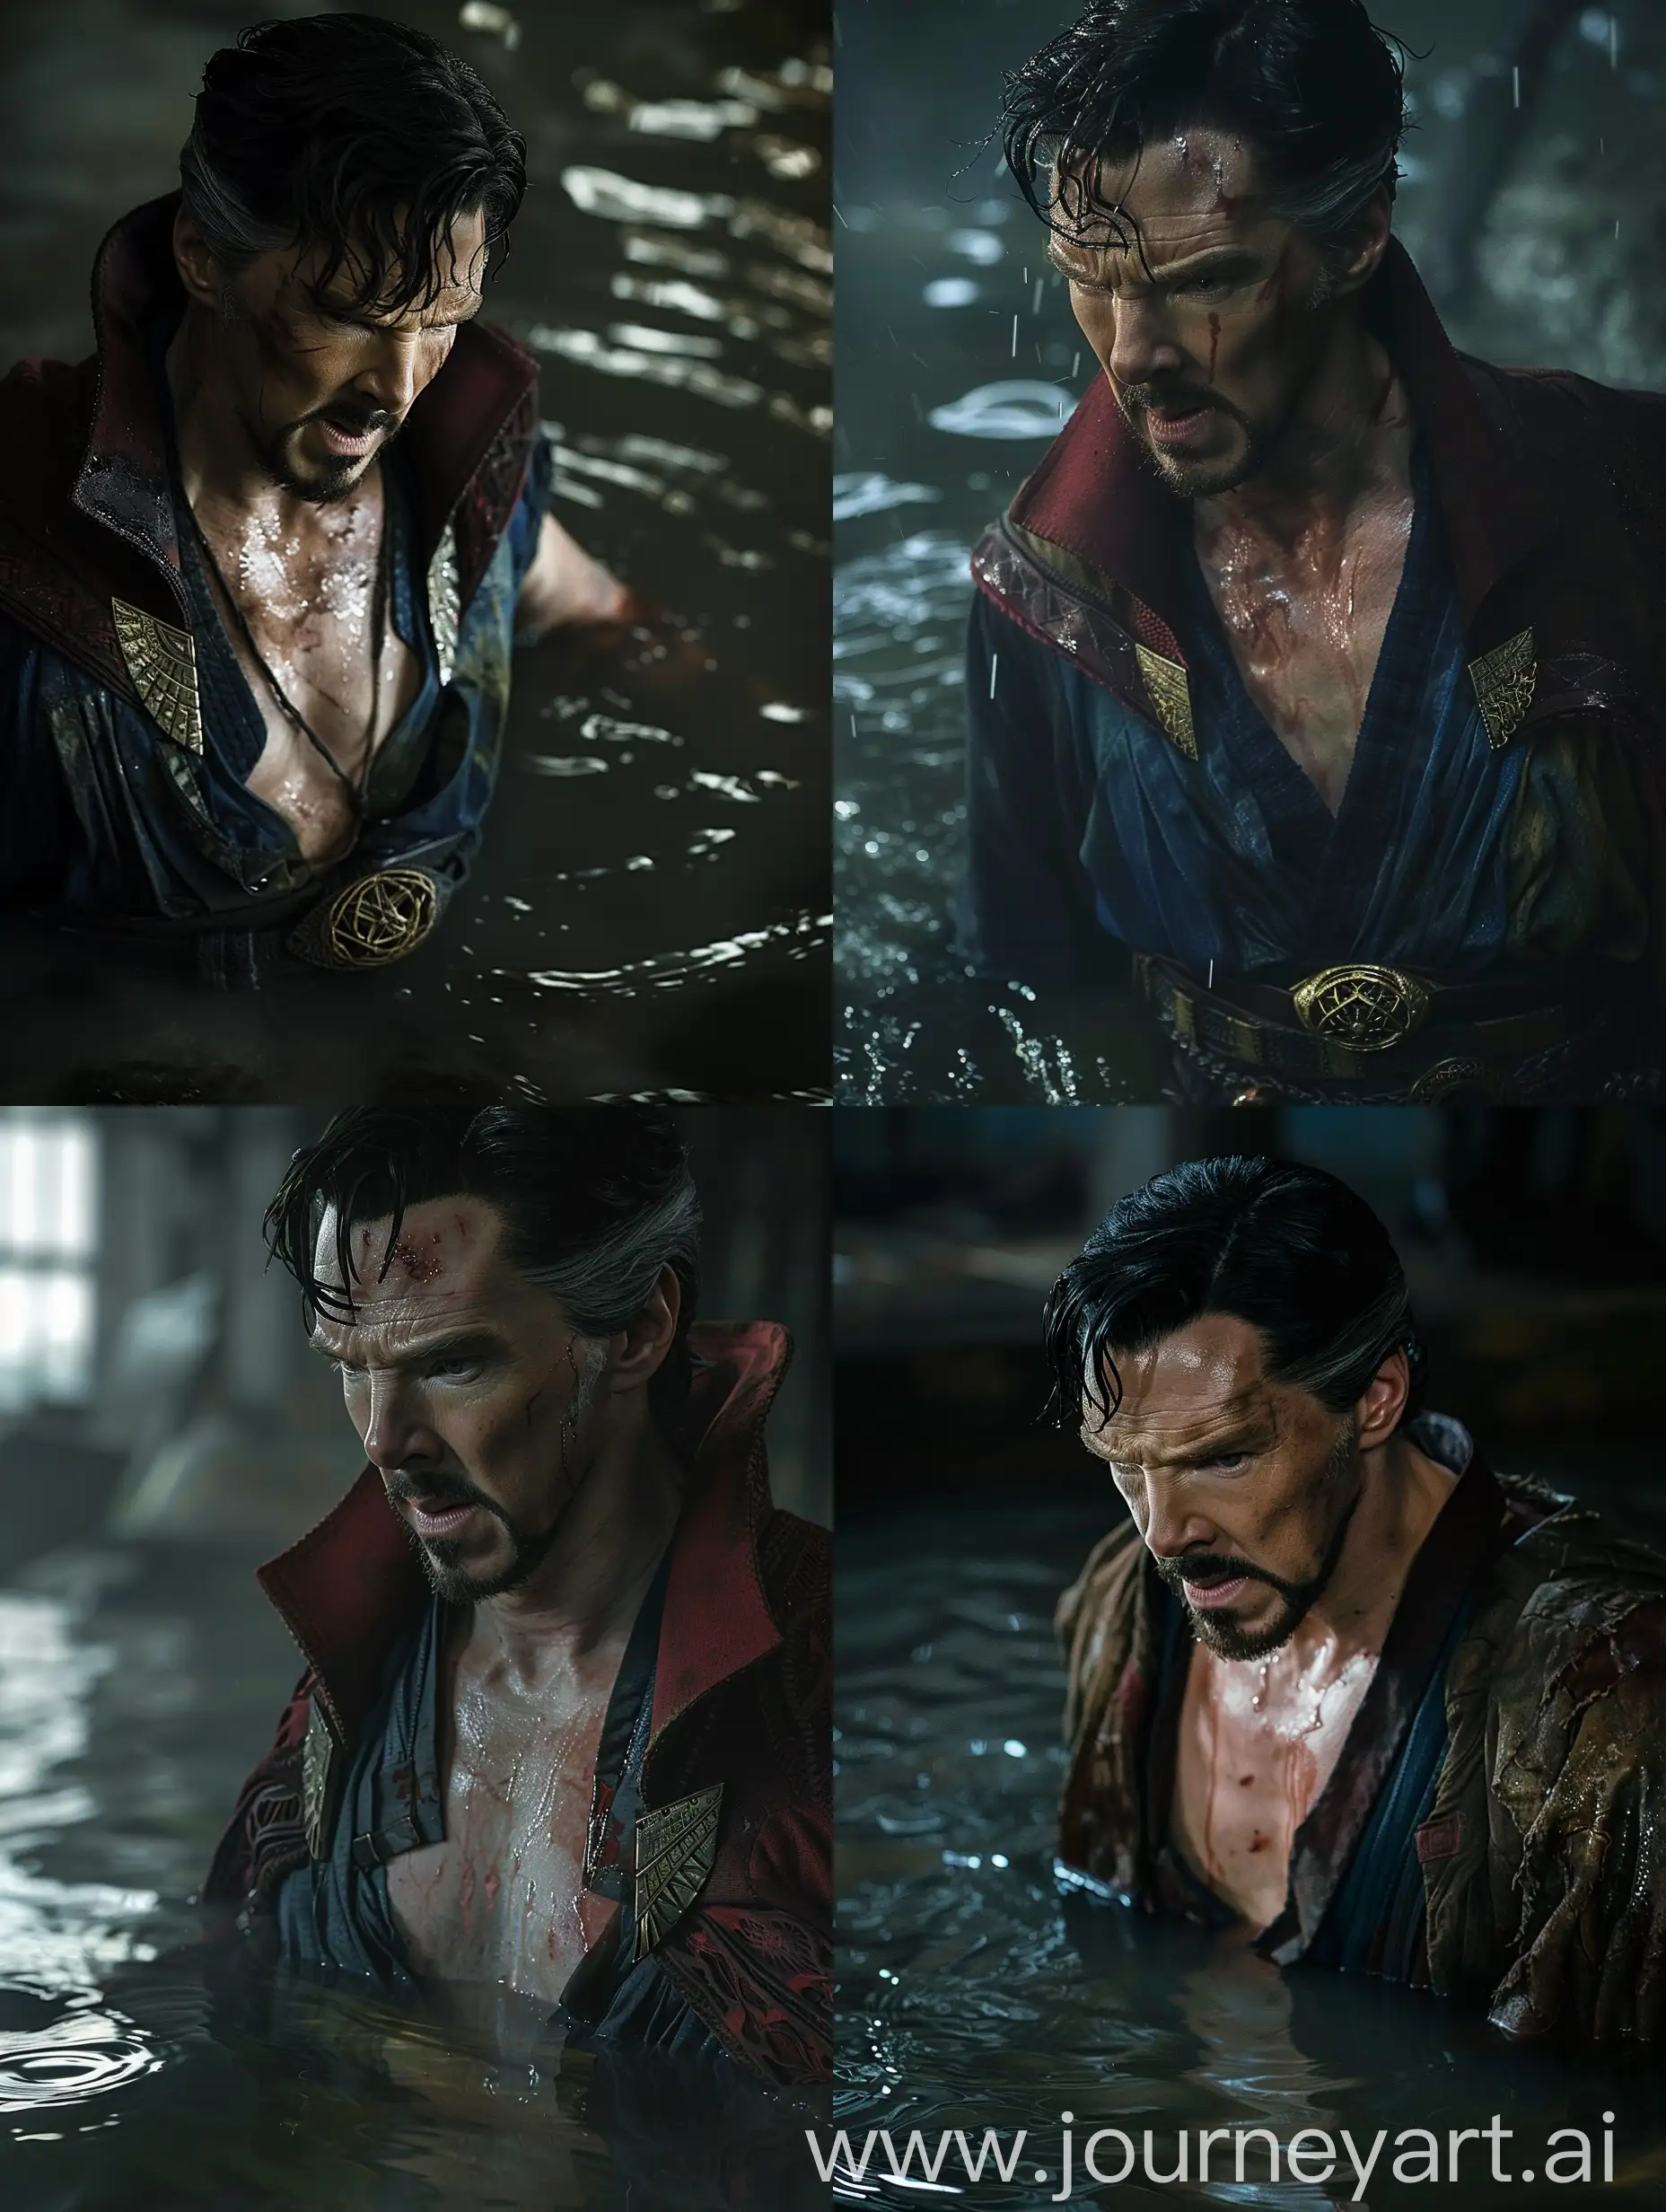 Close up of Doctor Strange in ripped, torn, ragged, dirty outfit, shirtless, in a dark room, water rising to his knees, wet, in dispair.